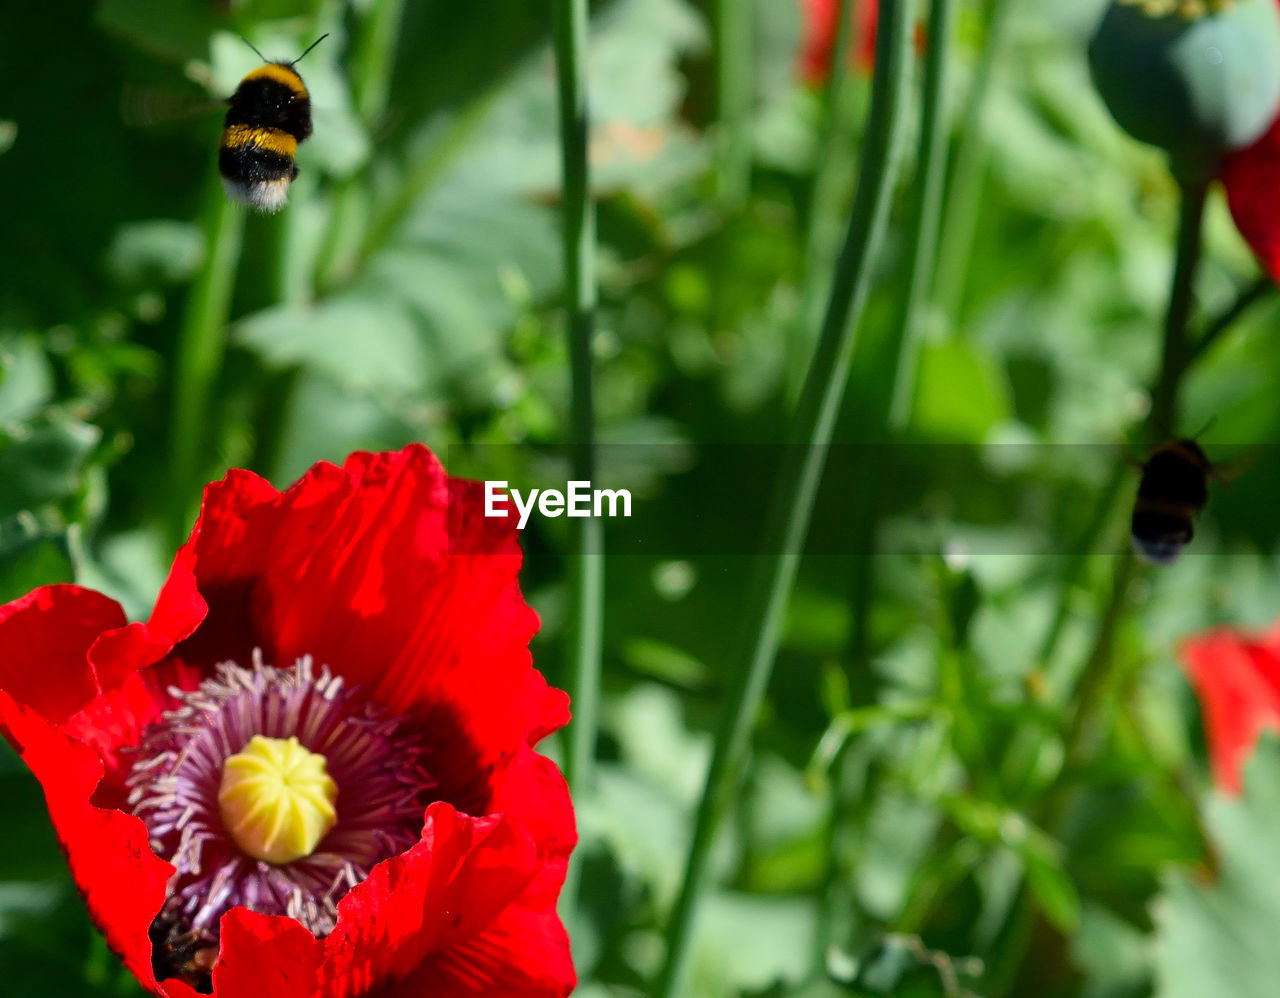 CLOSE-UP OF INSECT ON RED POPPY